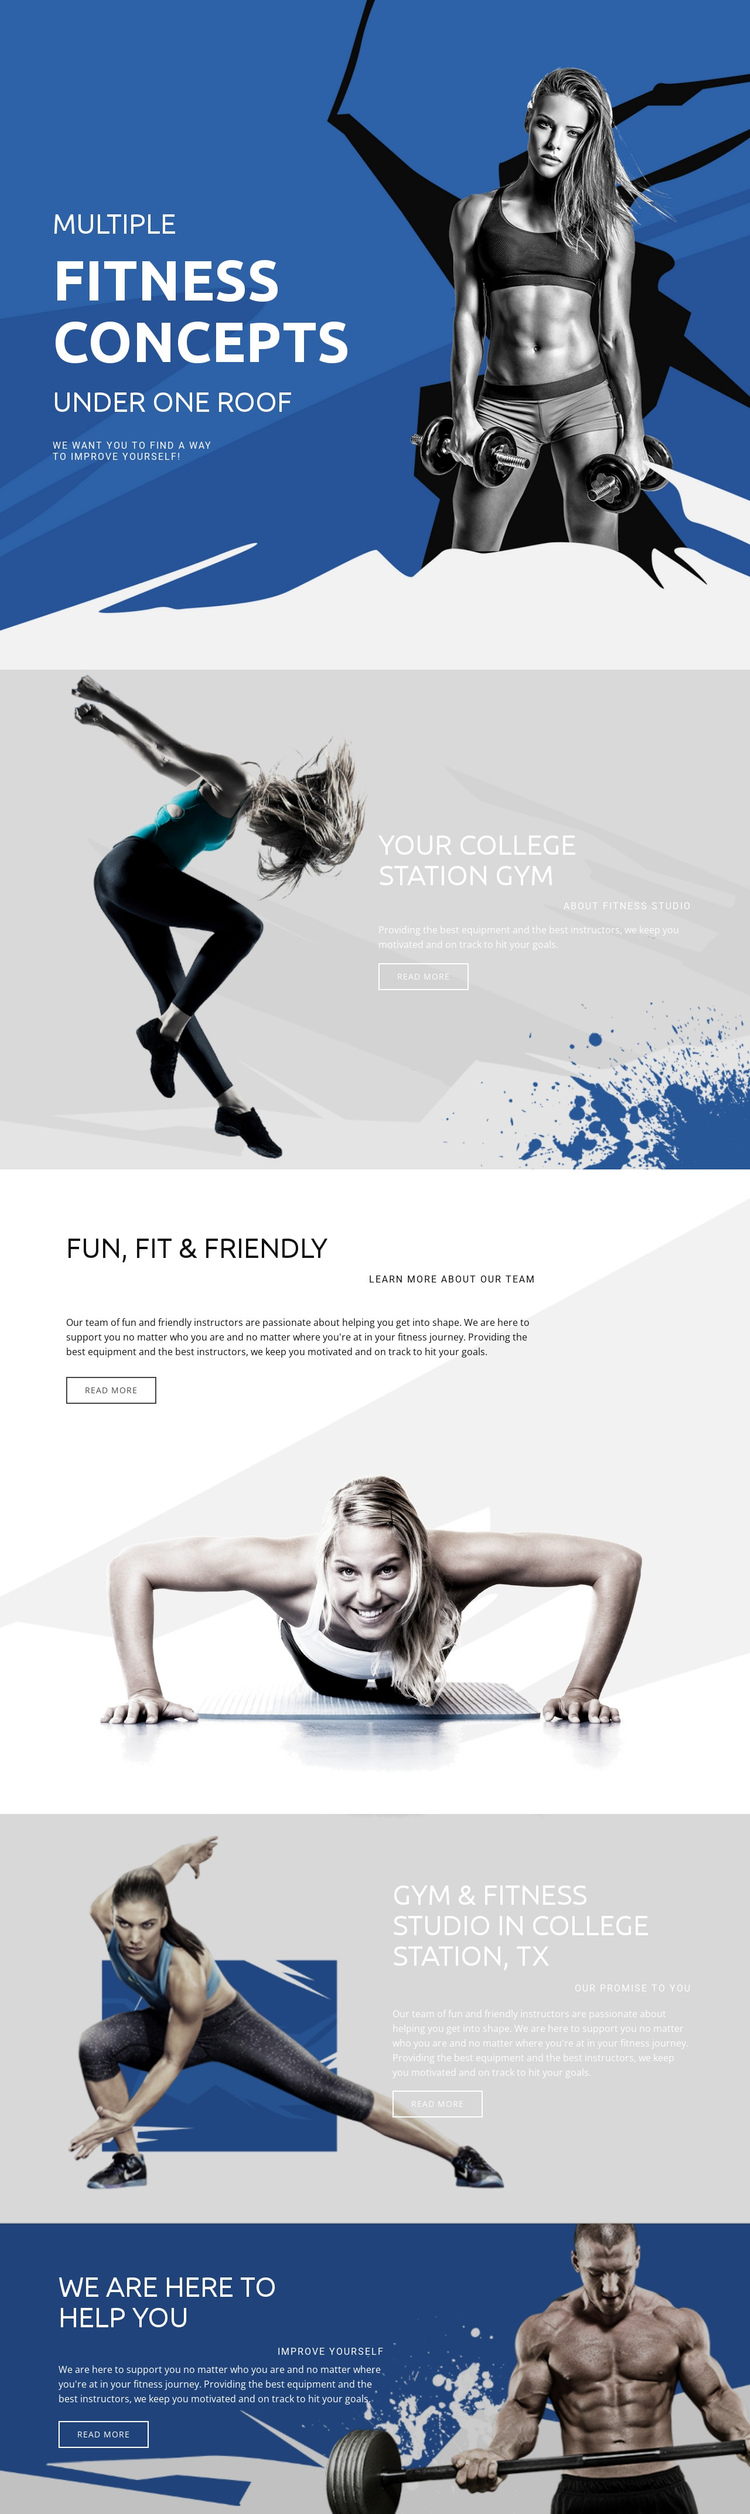 Best fitness and sports Website Builder Software